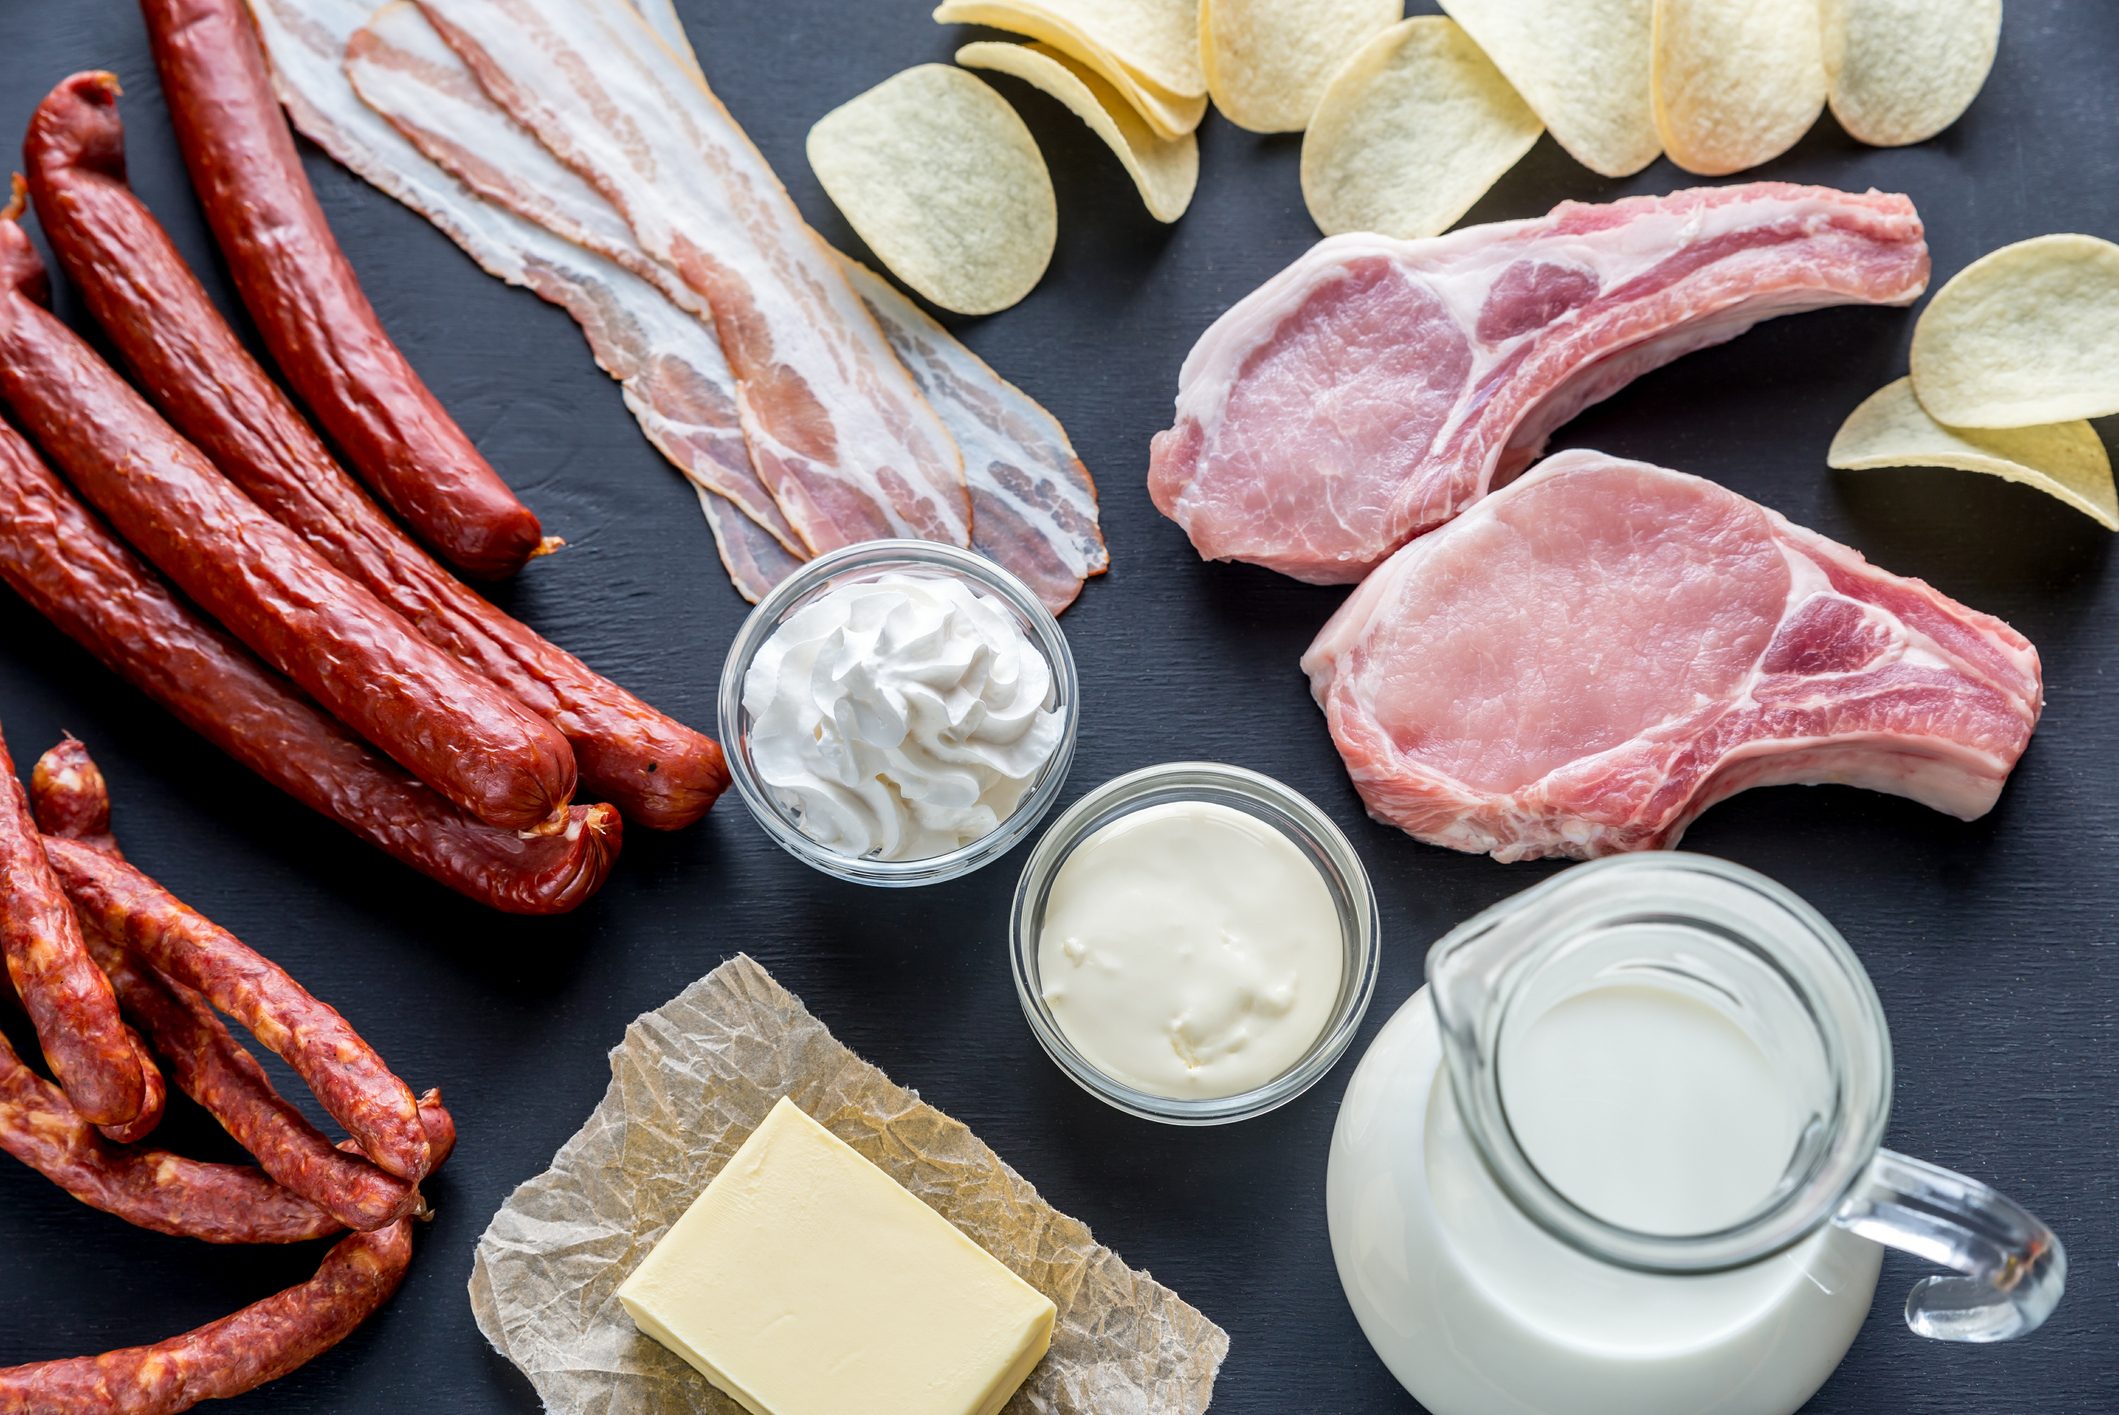 What Is Saturated Fat?